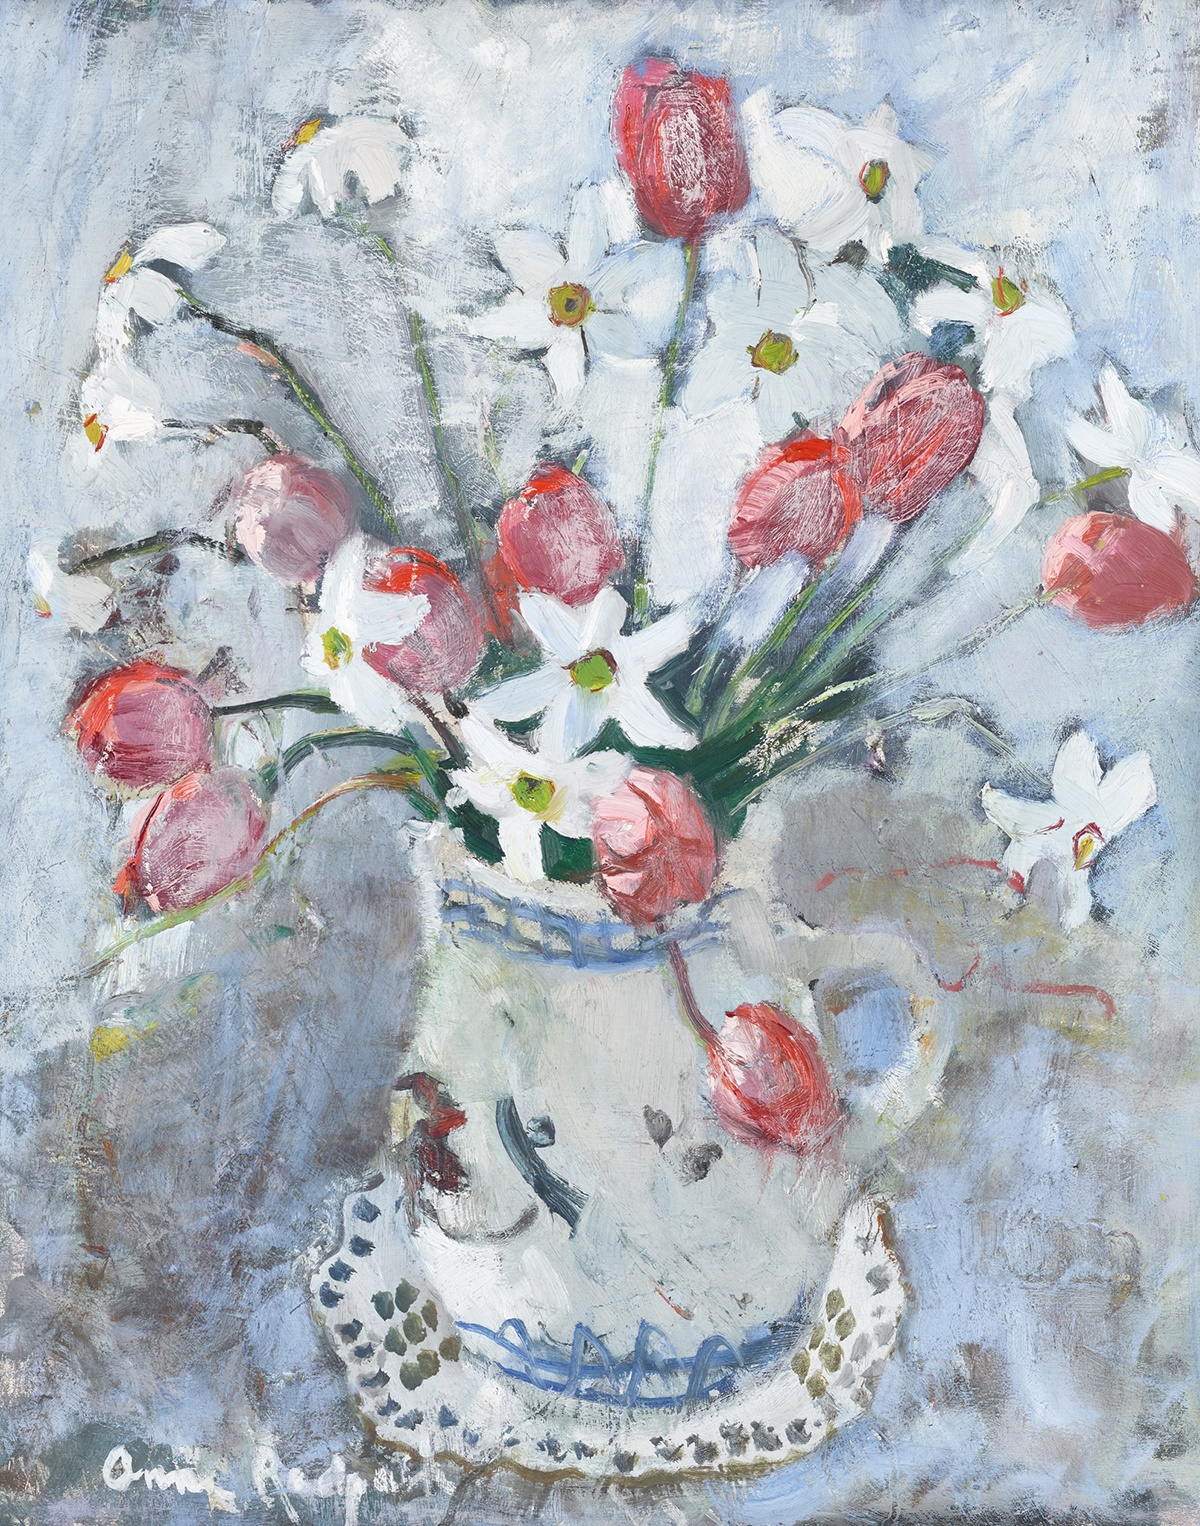 ANNE REDPATH O.B.E., R.S.A., A.R.A., L.L.D., A.R.W.S., R.O.I., R.B.A. (SCOTTISH 1895-1965) STILL LIFE - TULIPS AND LILIES  Sold for £75,000